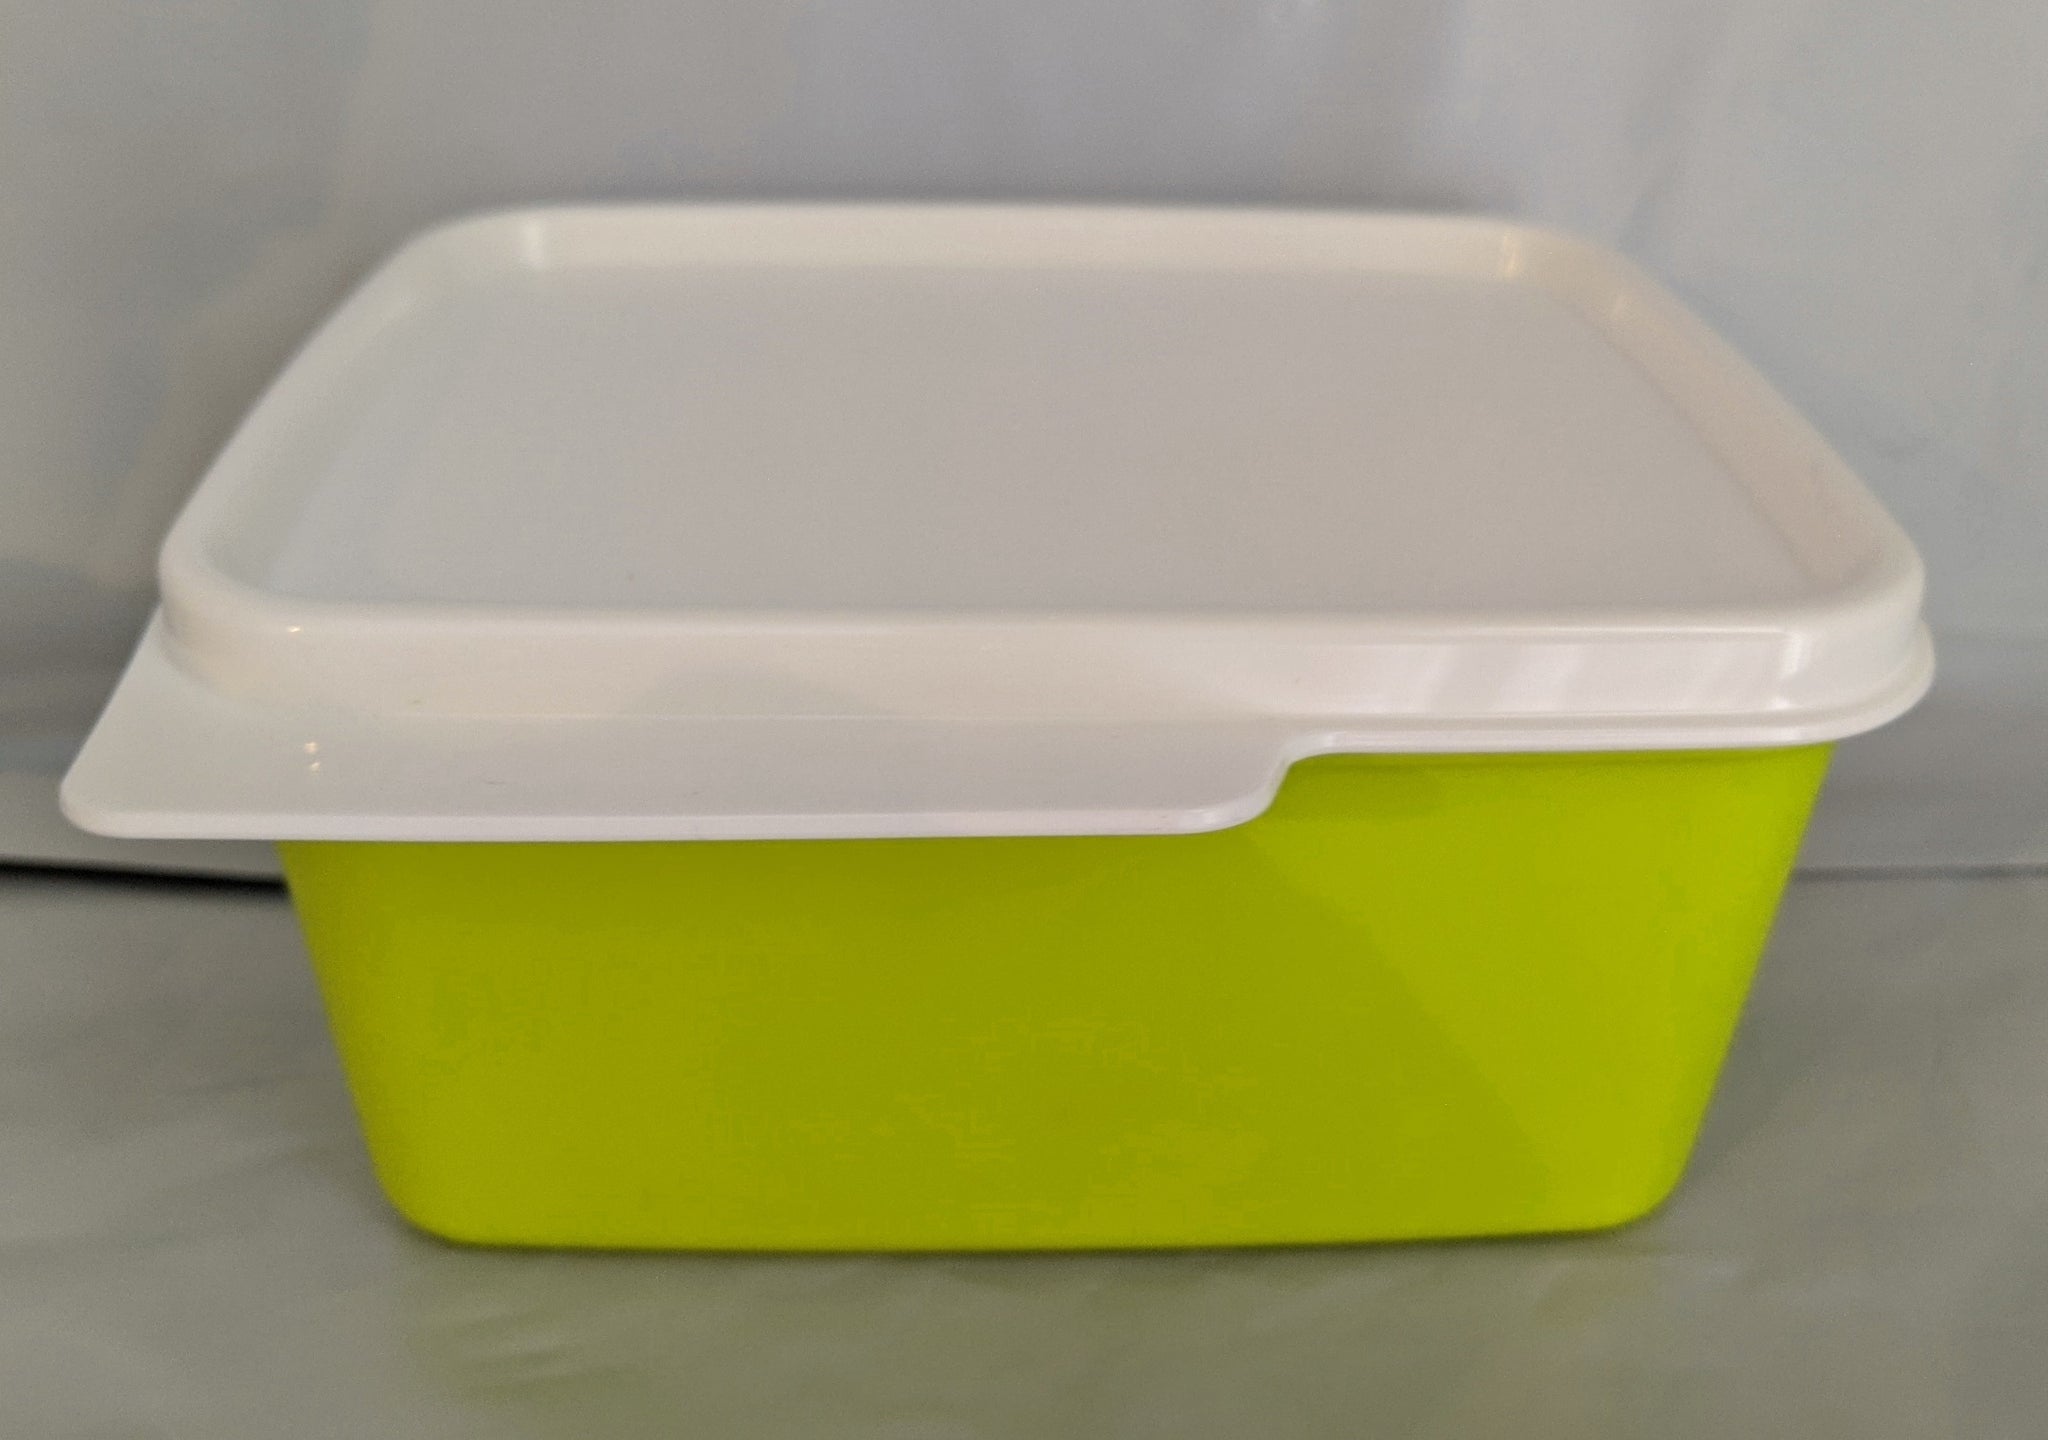 TUPPERWARE 1 SMALL MARGARITA KEEP TABS STORAGE KEEPER CONTAINER w/ WHITE TABBED SEAL